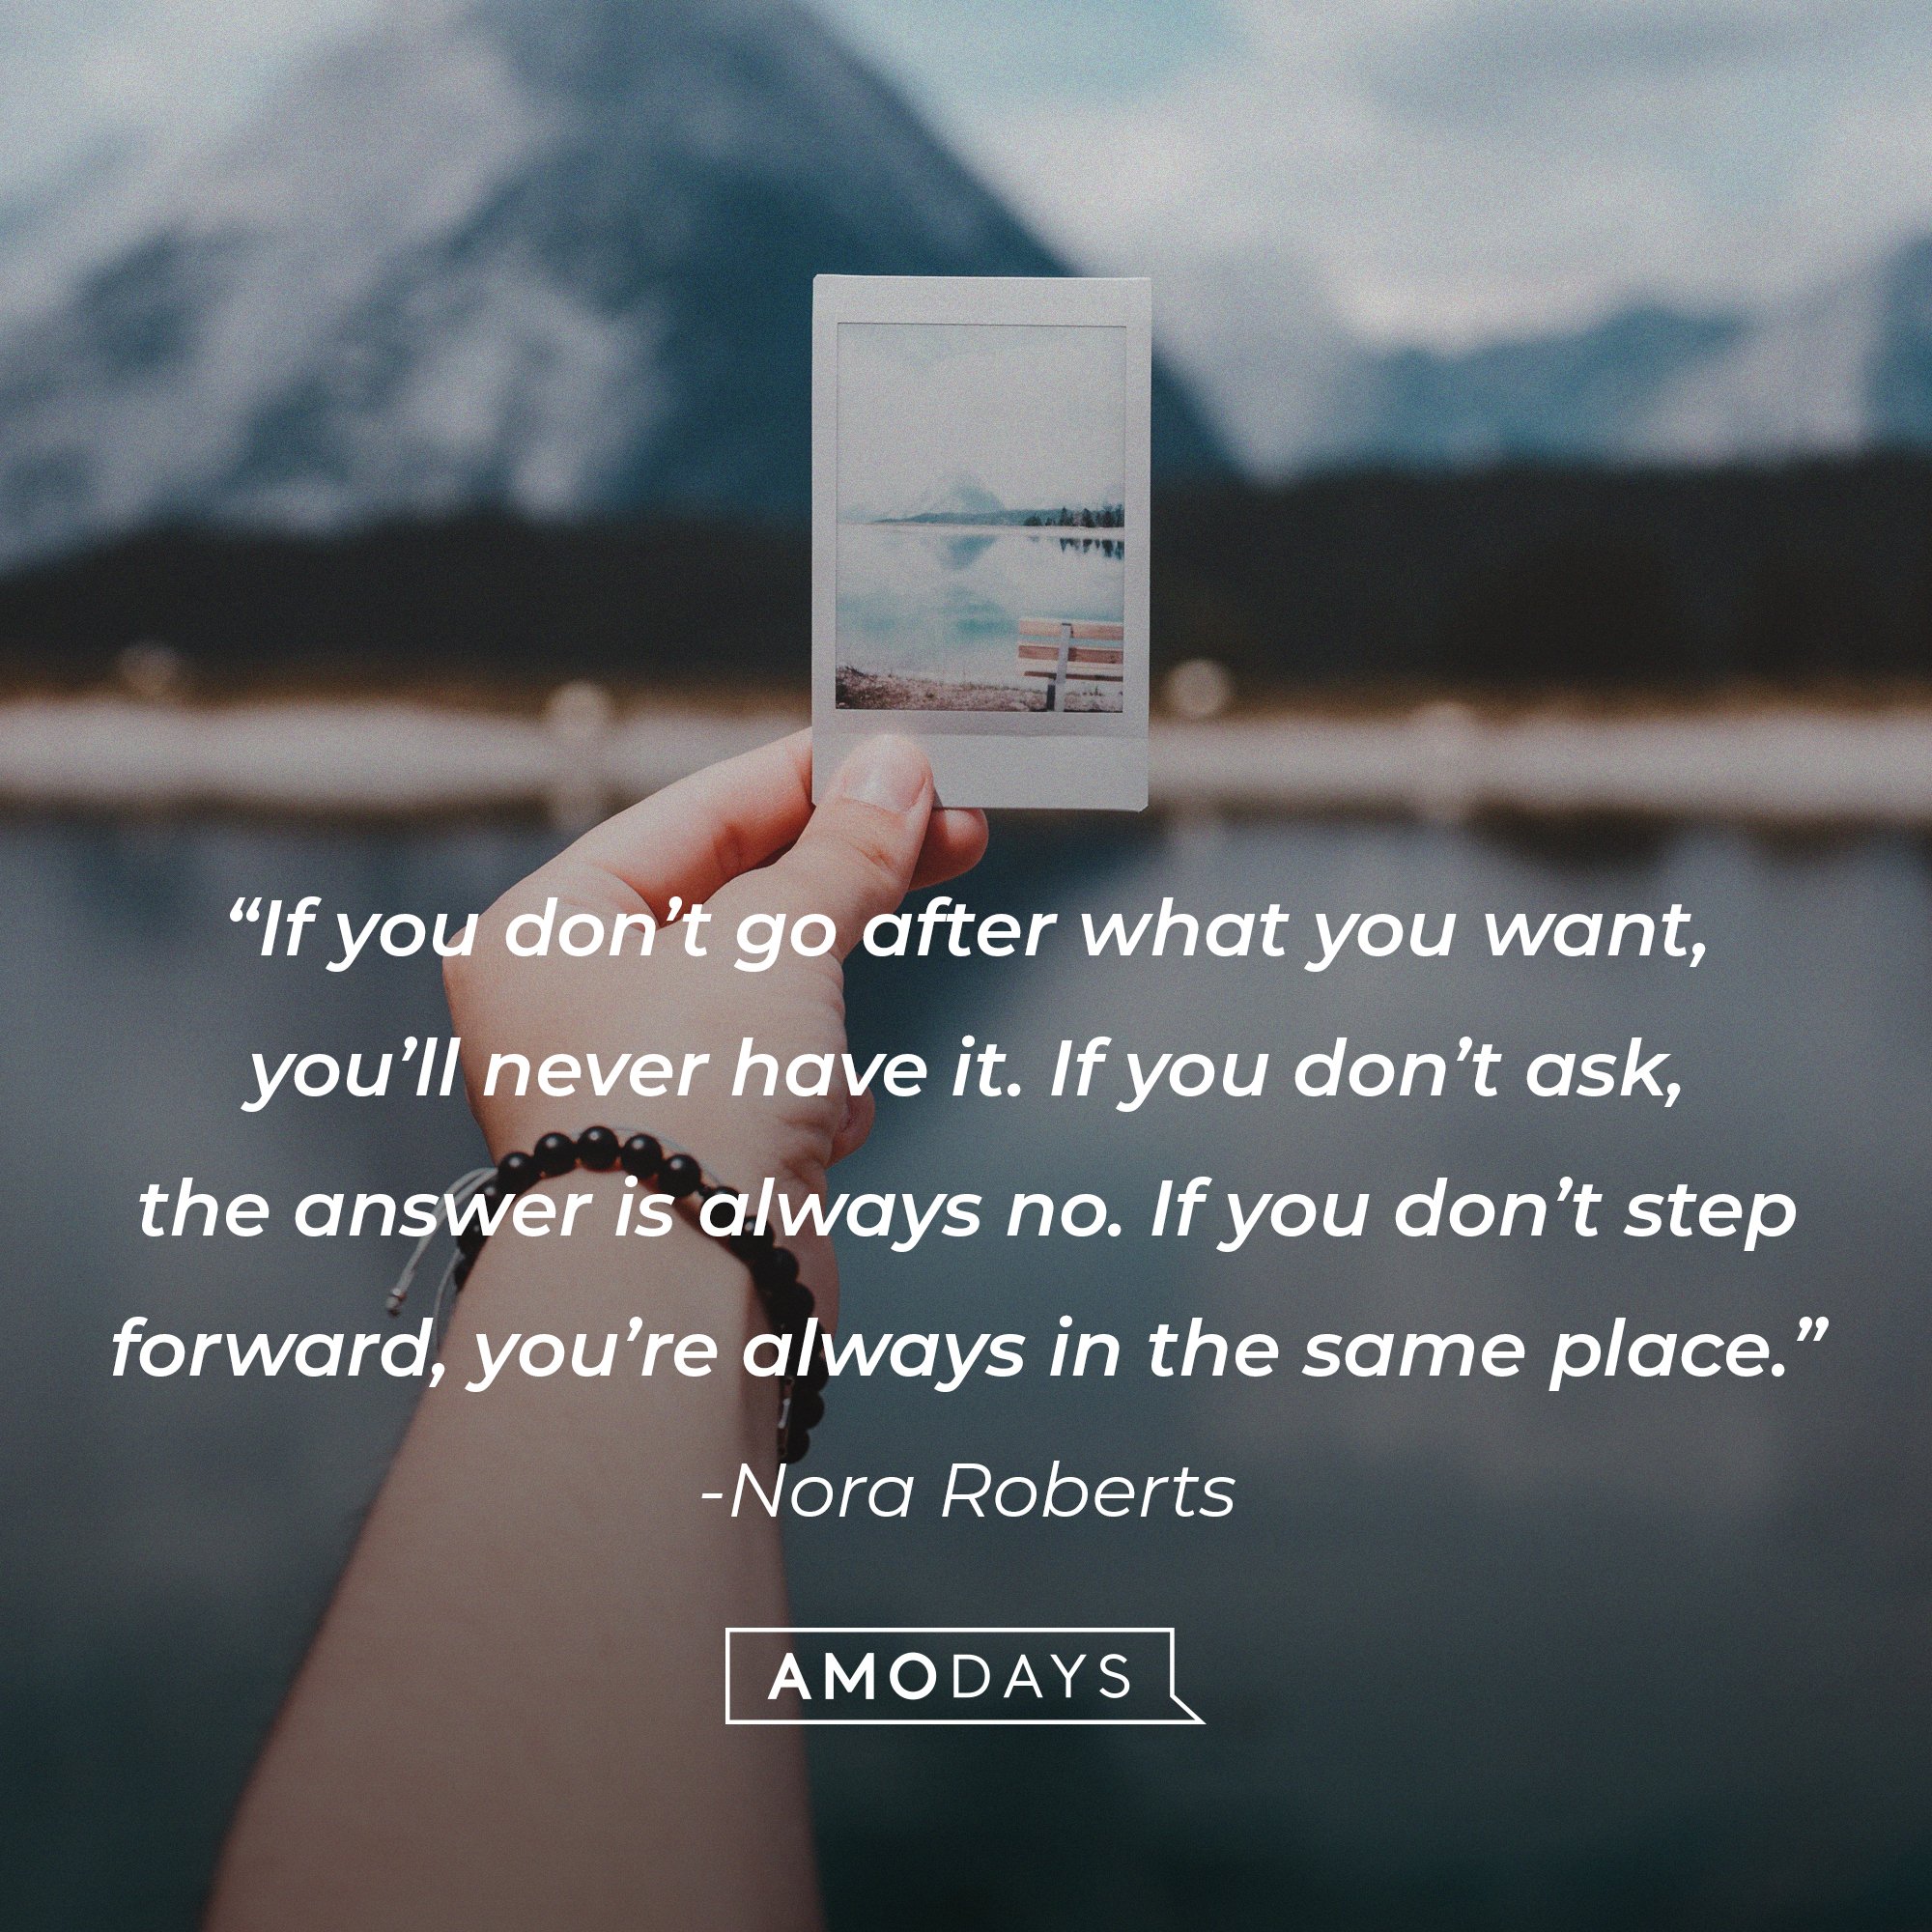 Nora Roberts' quote: “If you don’t go after what you want, you’ll never have it. If you don’t ask, the answer is always no. If you don’t step forward, you’re always in the same place.” | Image: AmoDays